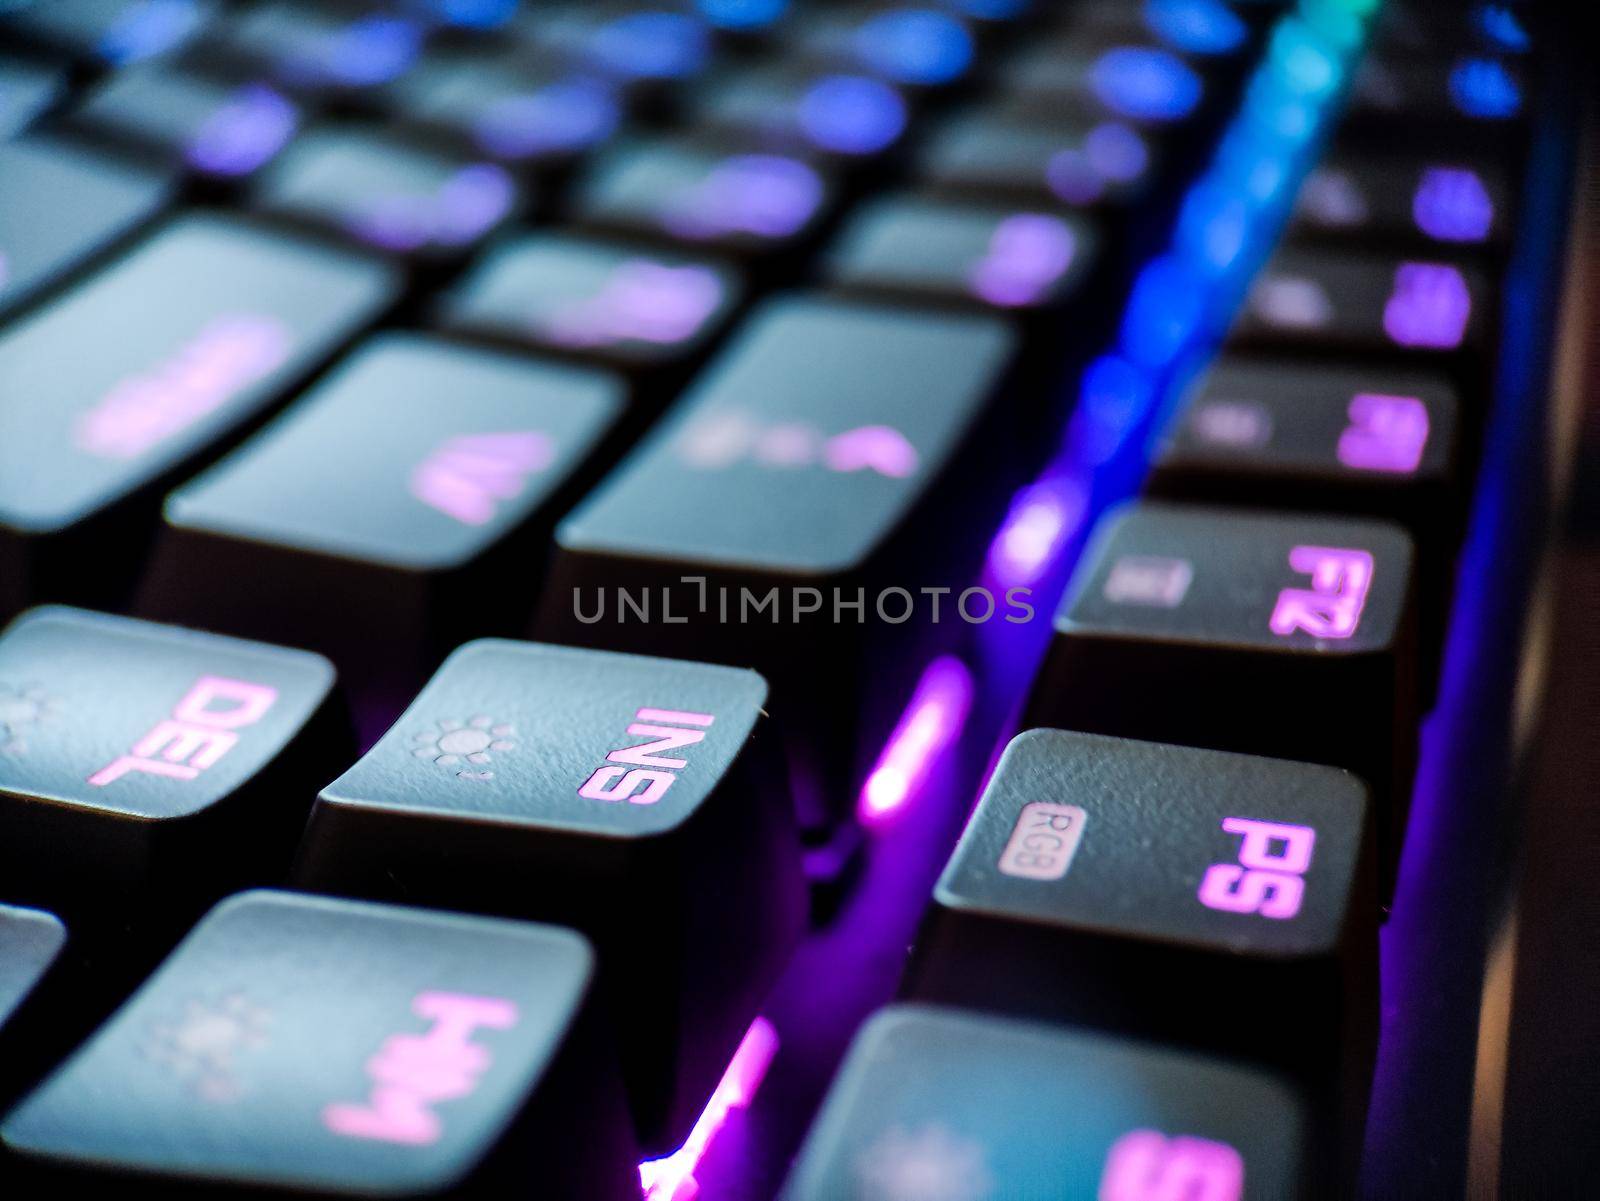 Gamer keyboard with neon backlight macro defocused close up. Online games and virtual reality concept background. High quality photo